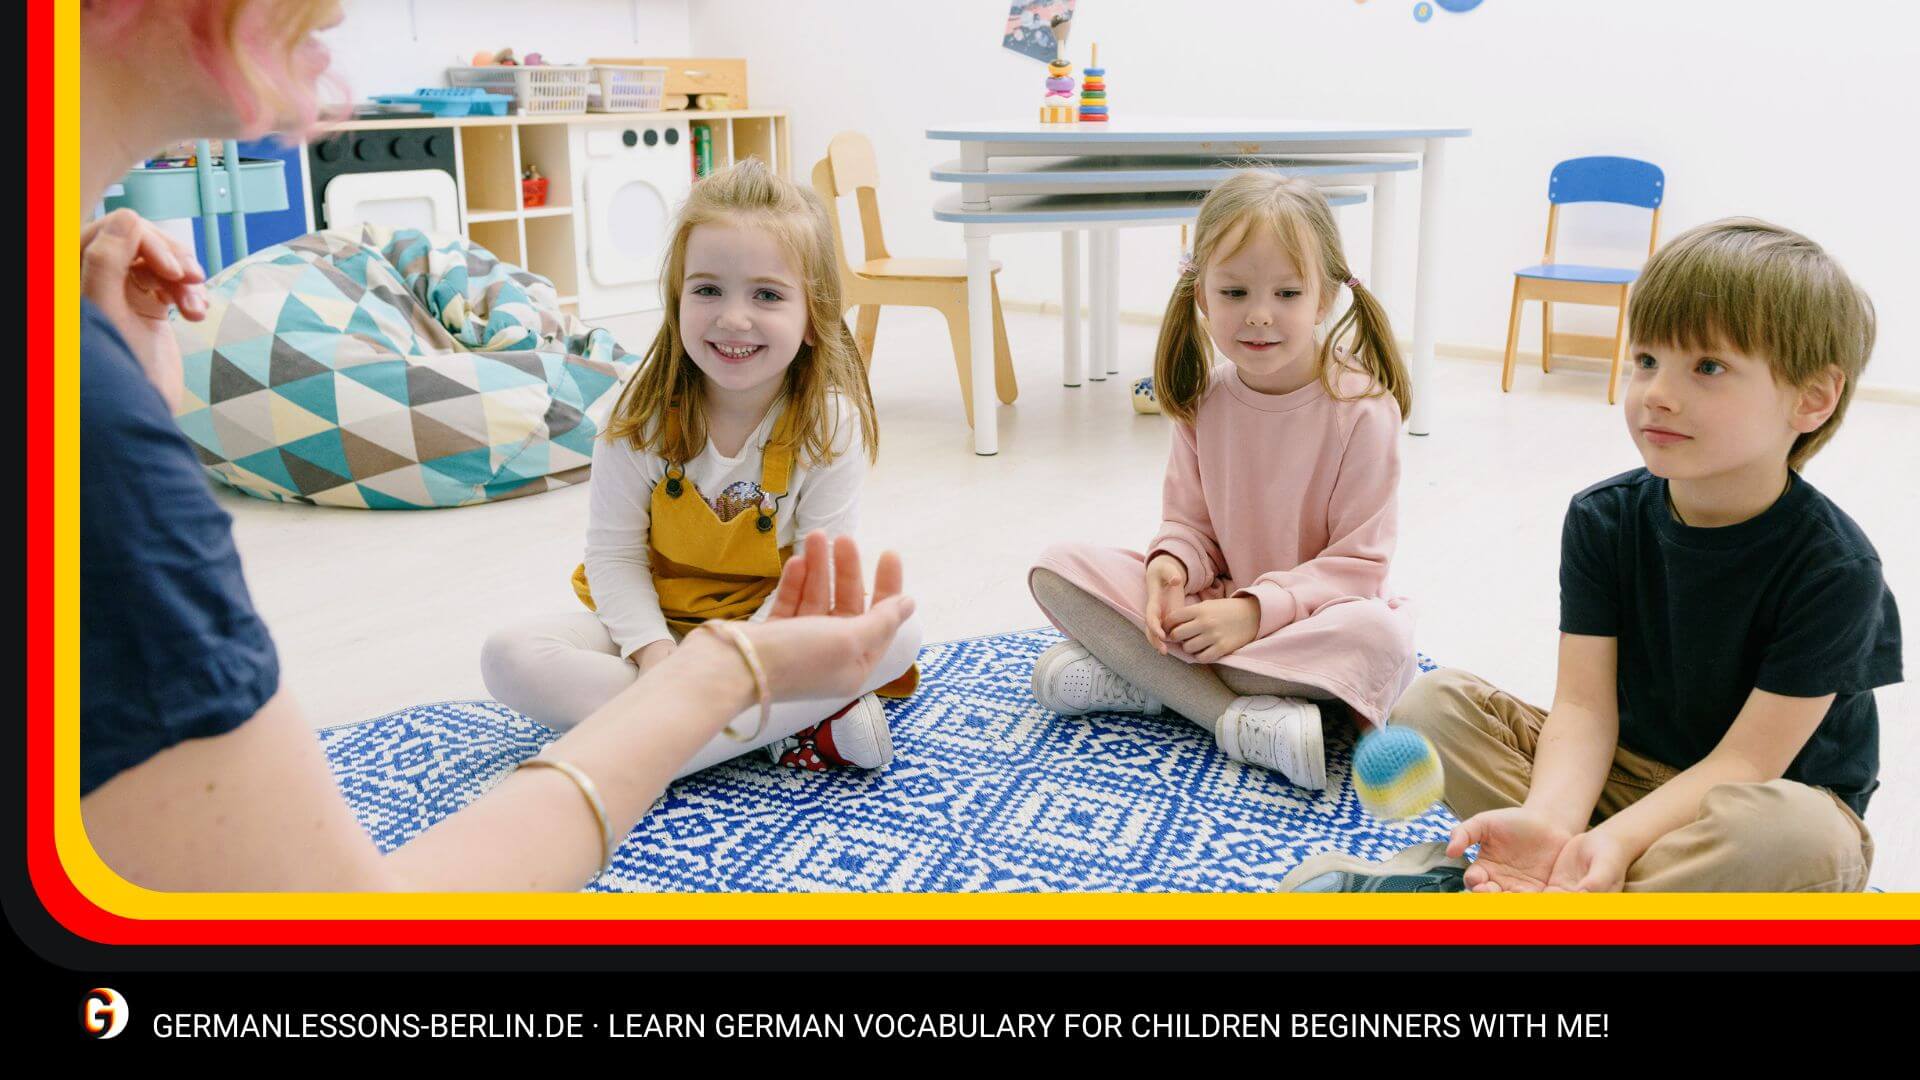 Learn German Vocabulary for Children Beginners with Me!